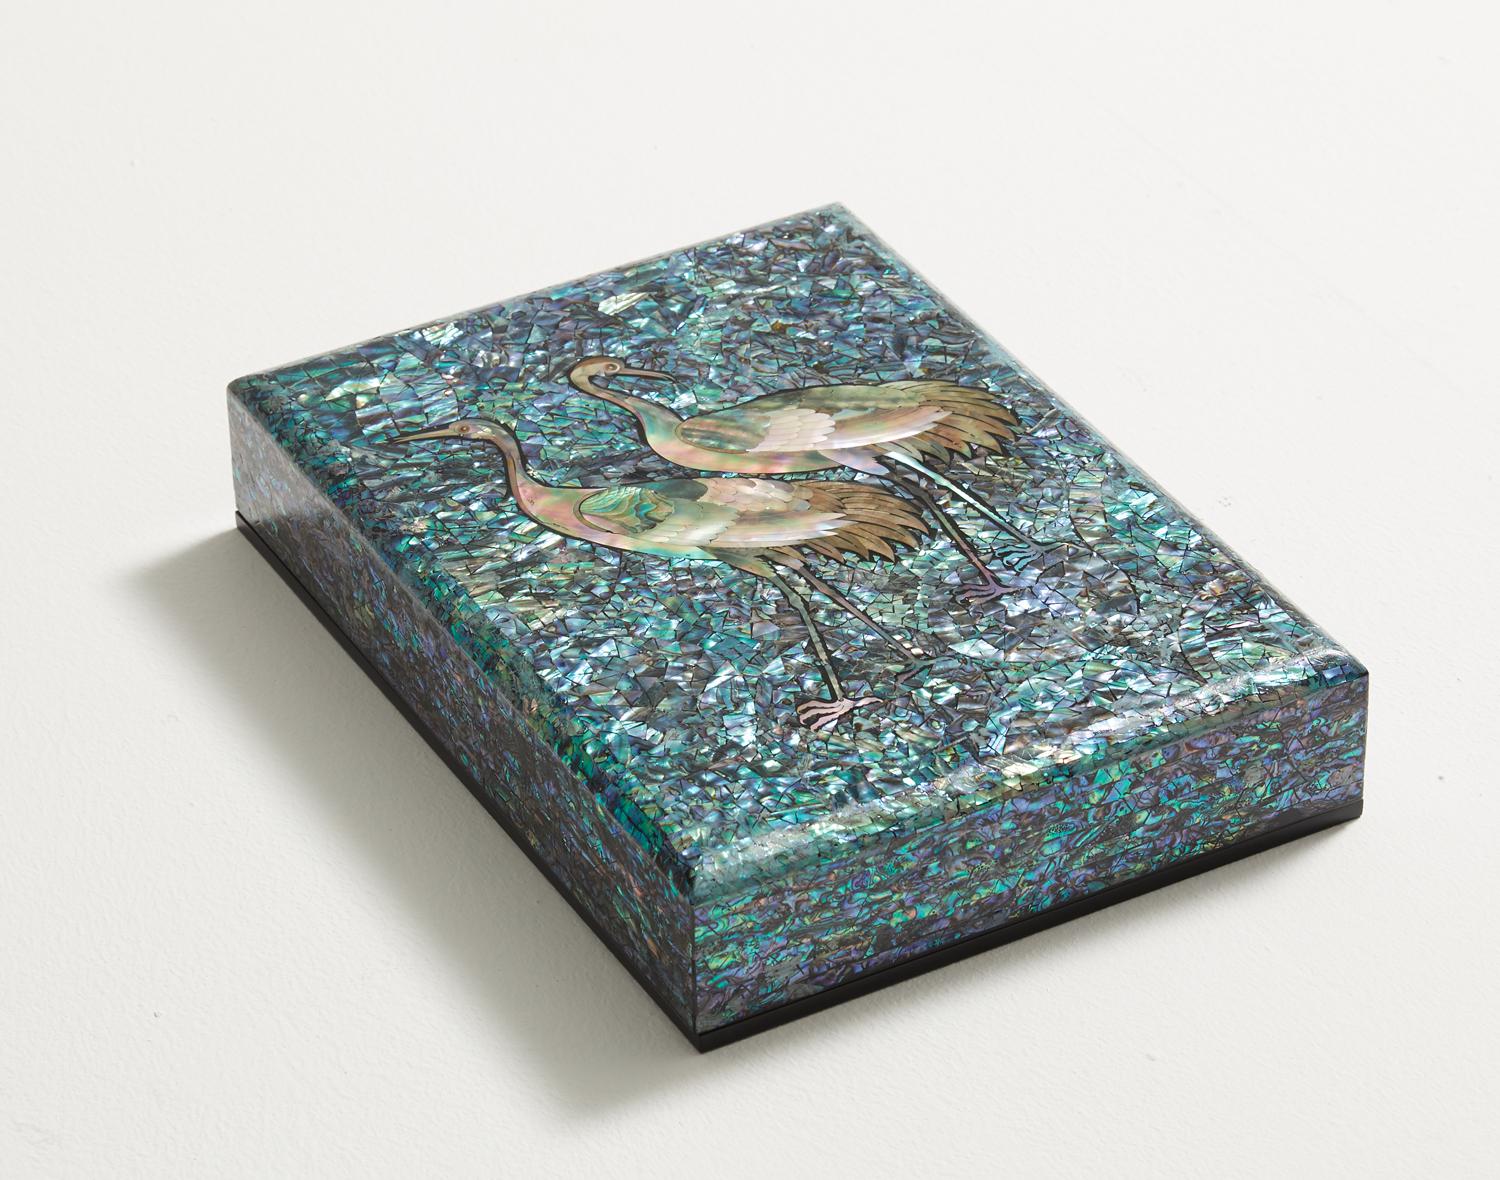 This artwork presents a wooden box inlaid with the image of cranes carved from mother of pearl. The sky is engraved with the blue shade of mother of pearl to highlight the profound mysteriousness of the cranes. The brilliant light shines gloriously